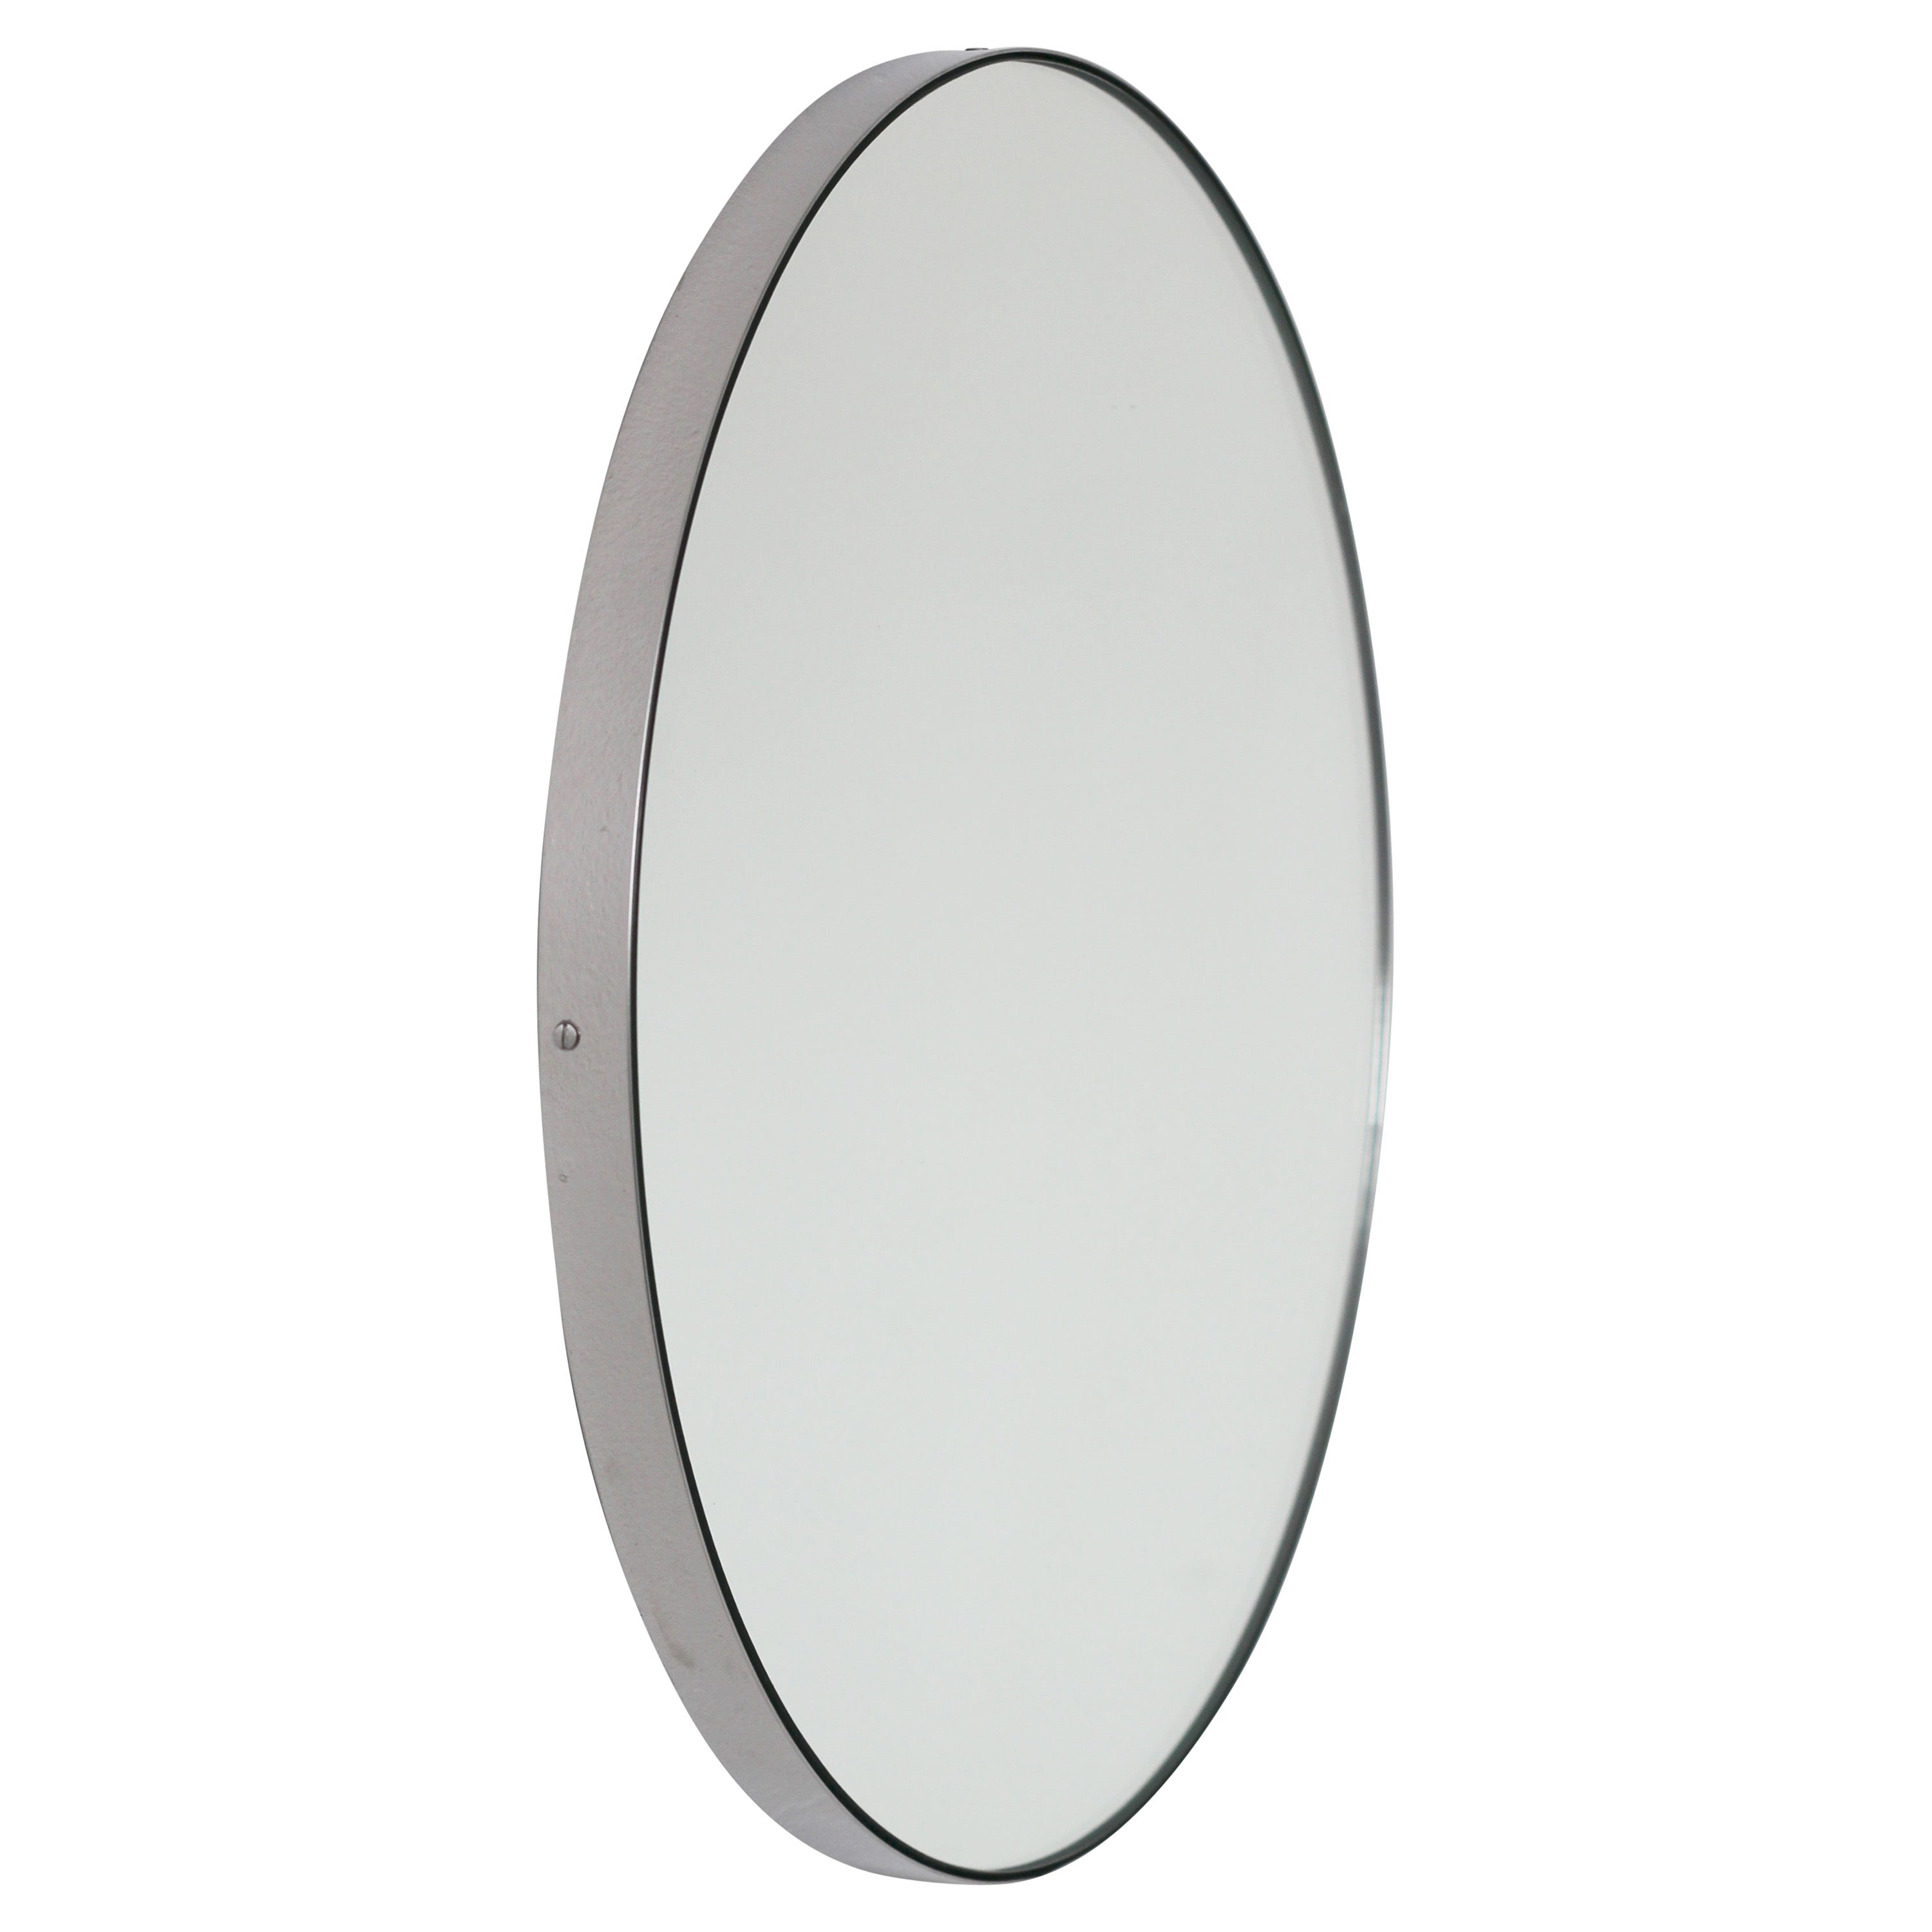 Orbis Round Modern Mirror with Brushed Stainless Steel Frame, Regular For Sale